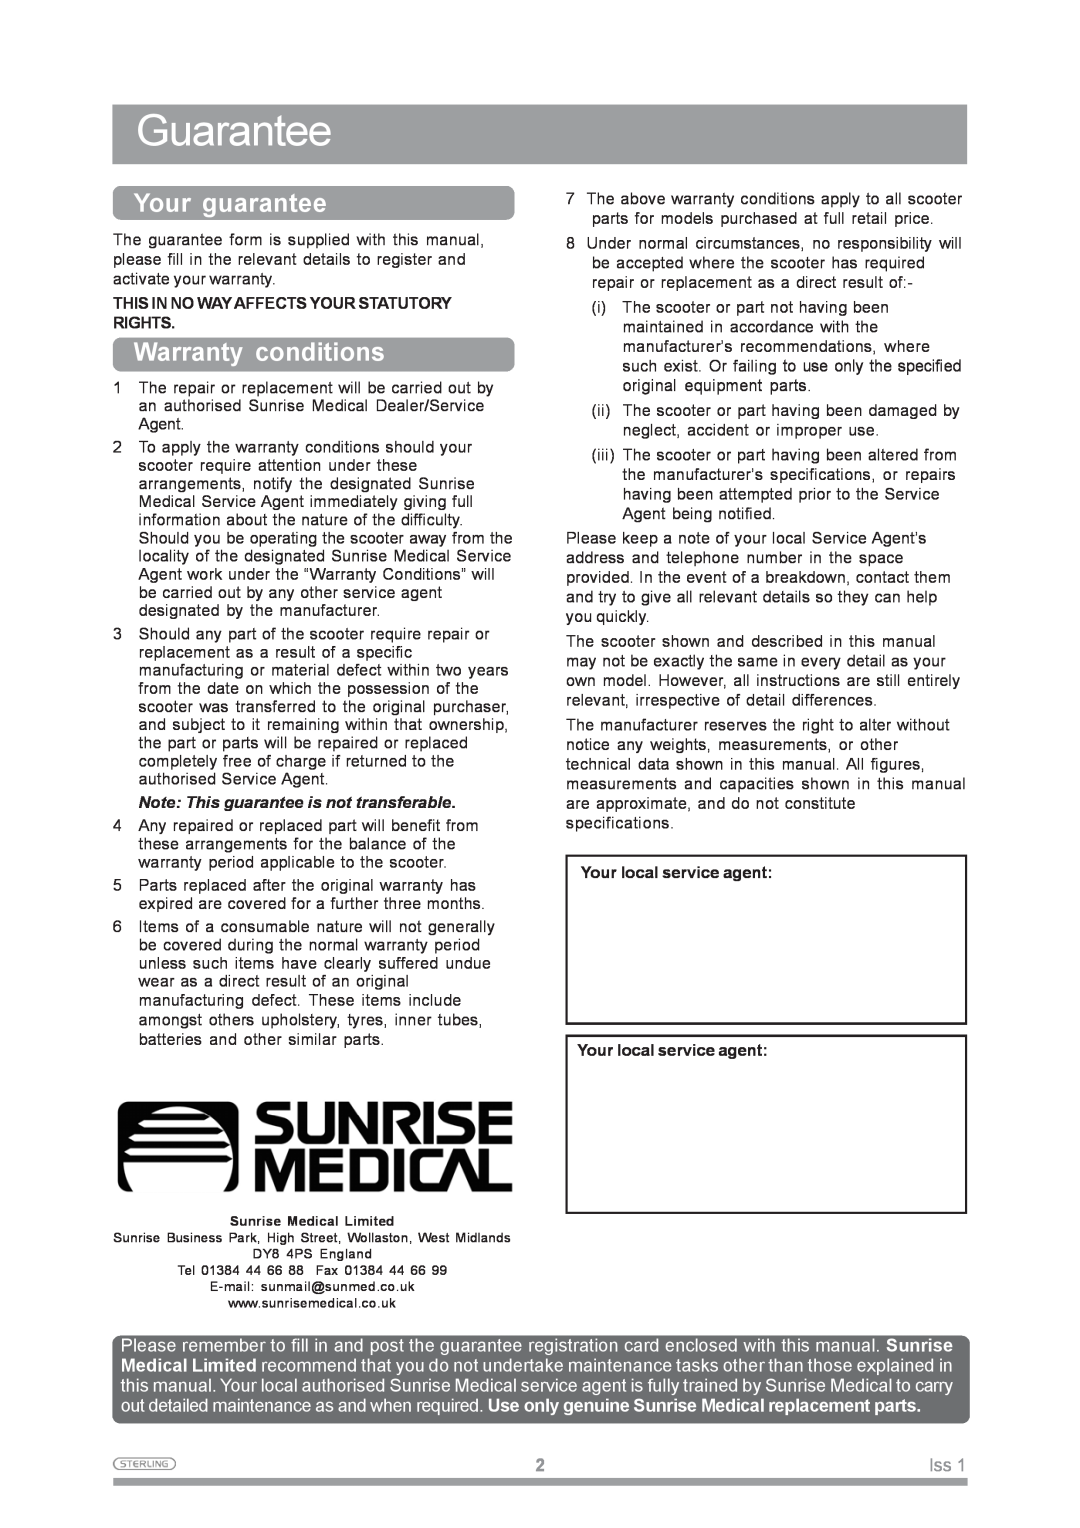 Sunrise Medical Mobility Scooter Guarantee, Your guarantee, Warranty conditions, Note This guarantee is not transferable 